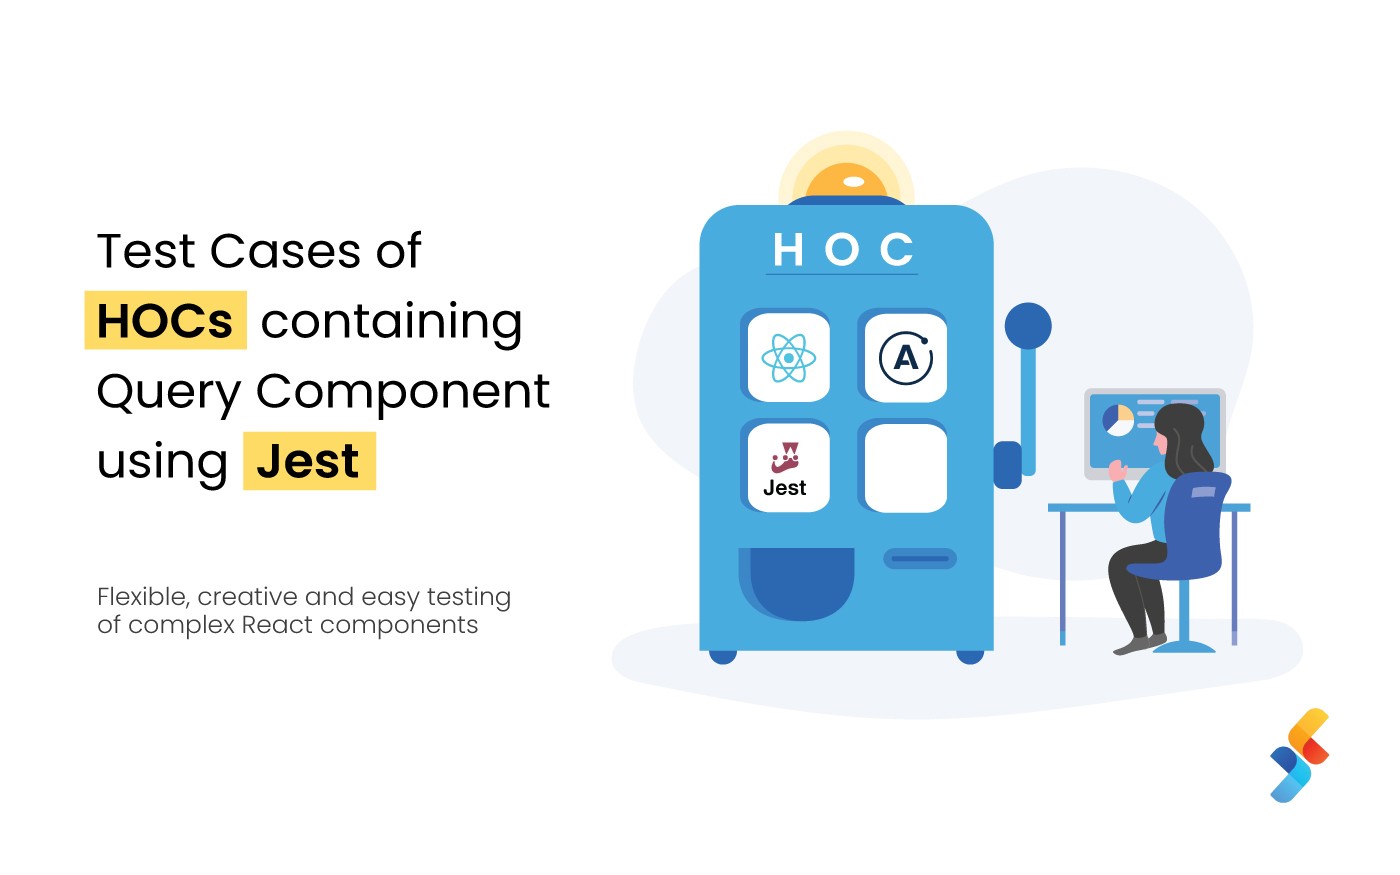 Test Cases of HOCs containing Query Component using Jest